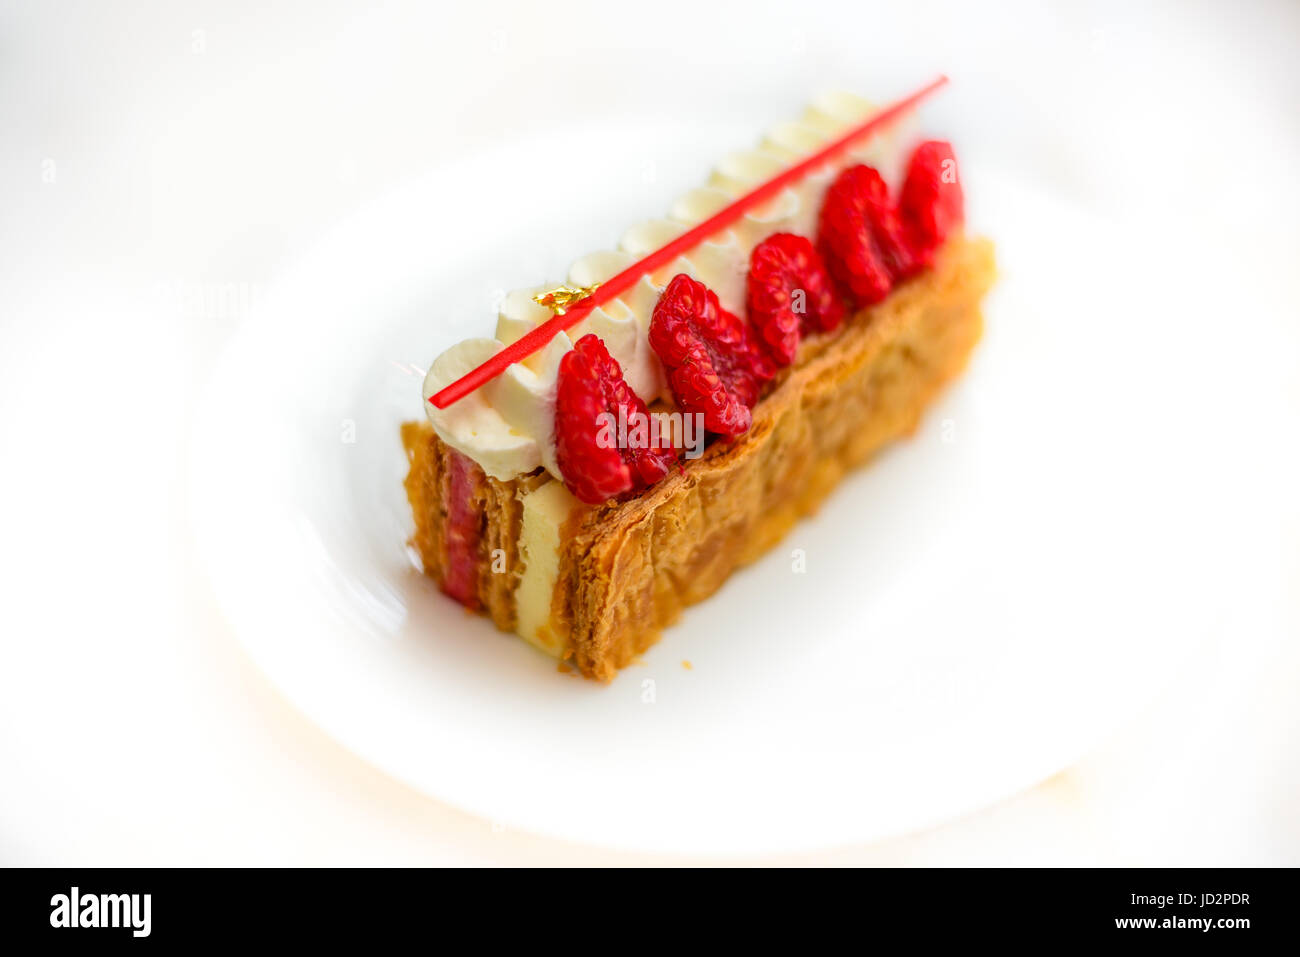 Vanilla and Raspberry Mille feuille pastry cake on white china plate Stock Photo